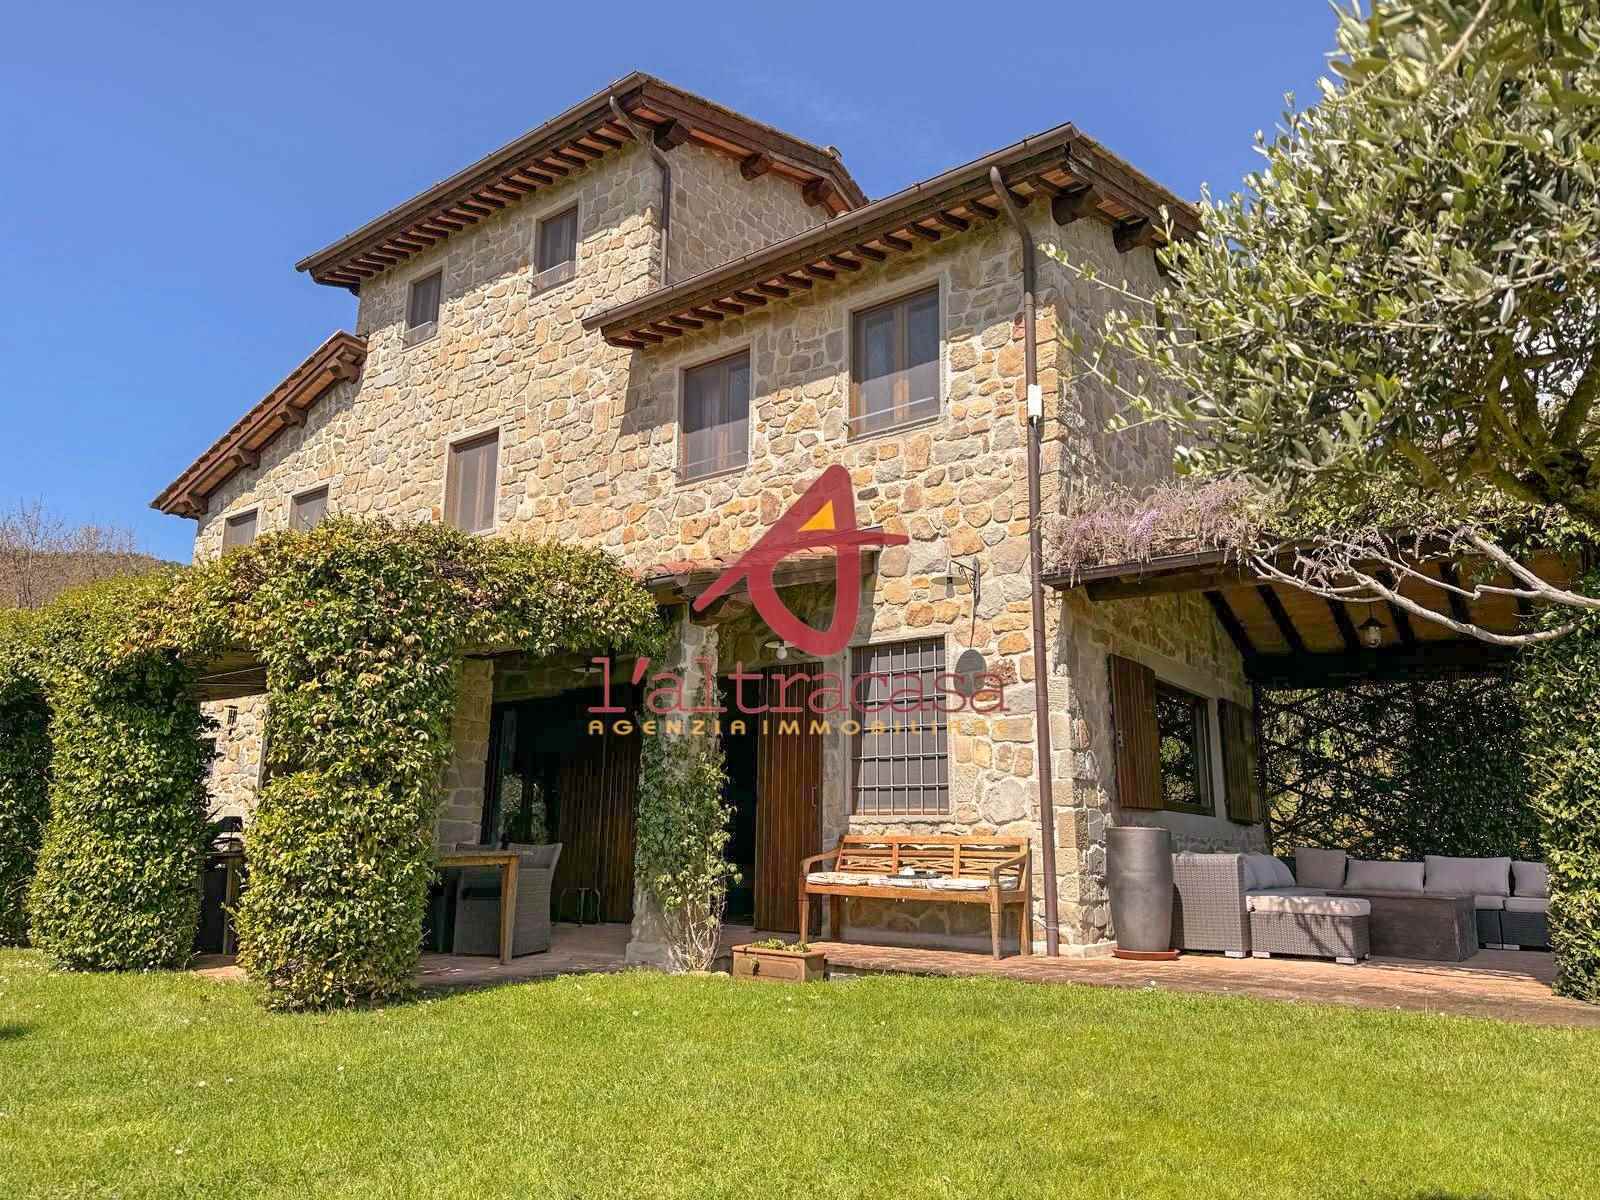 PESCIA HILL, 15 minutes away from the center and all services, situated between Lucca (25 km) and Florence (60 km), with beautiful panoramic views of 